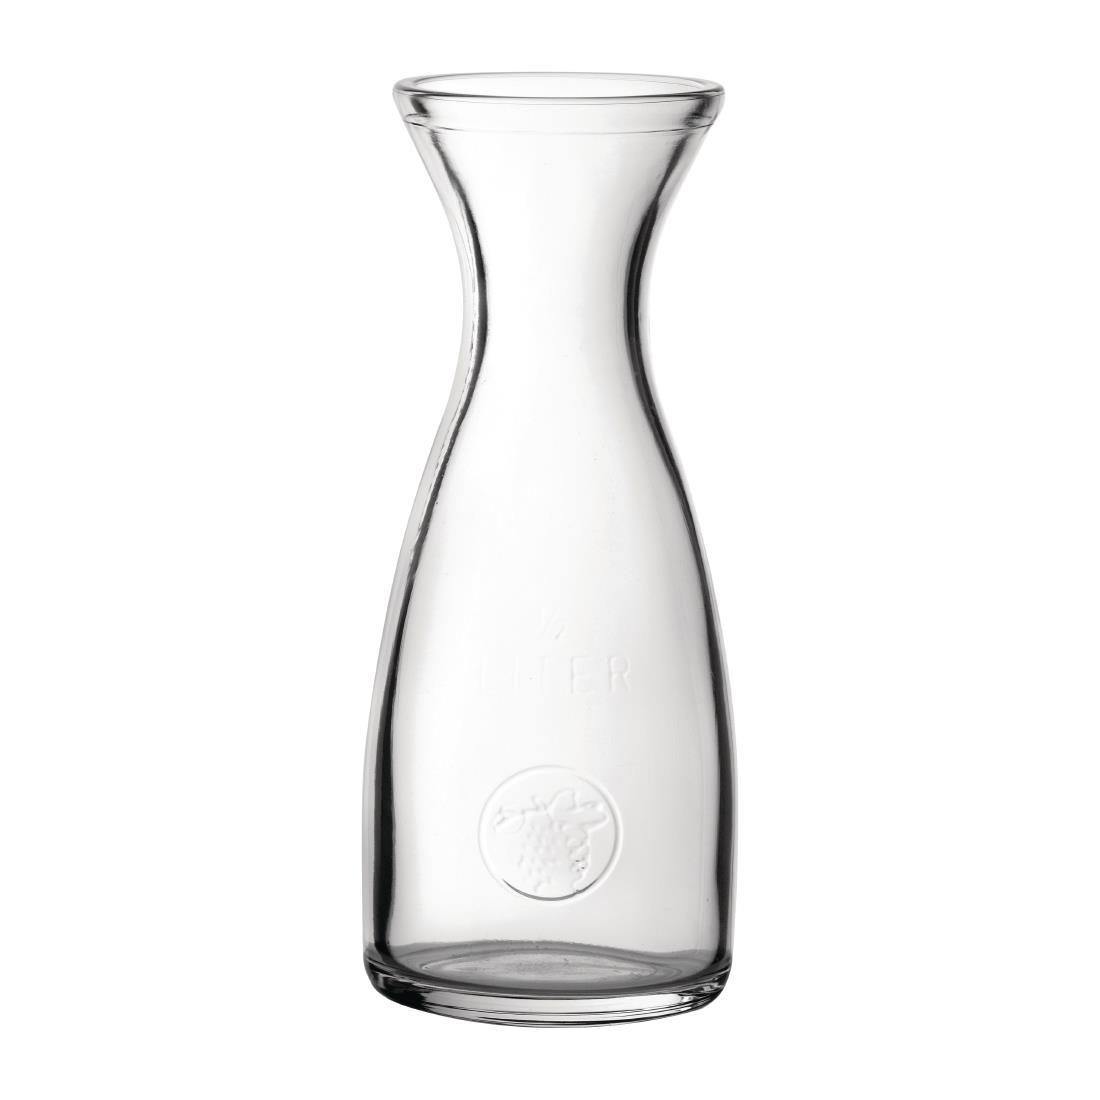 Utopia Carafes 1Ltr (Pack of 6) - CY408  - 1